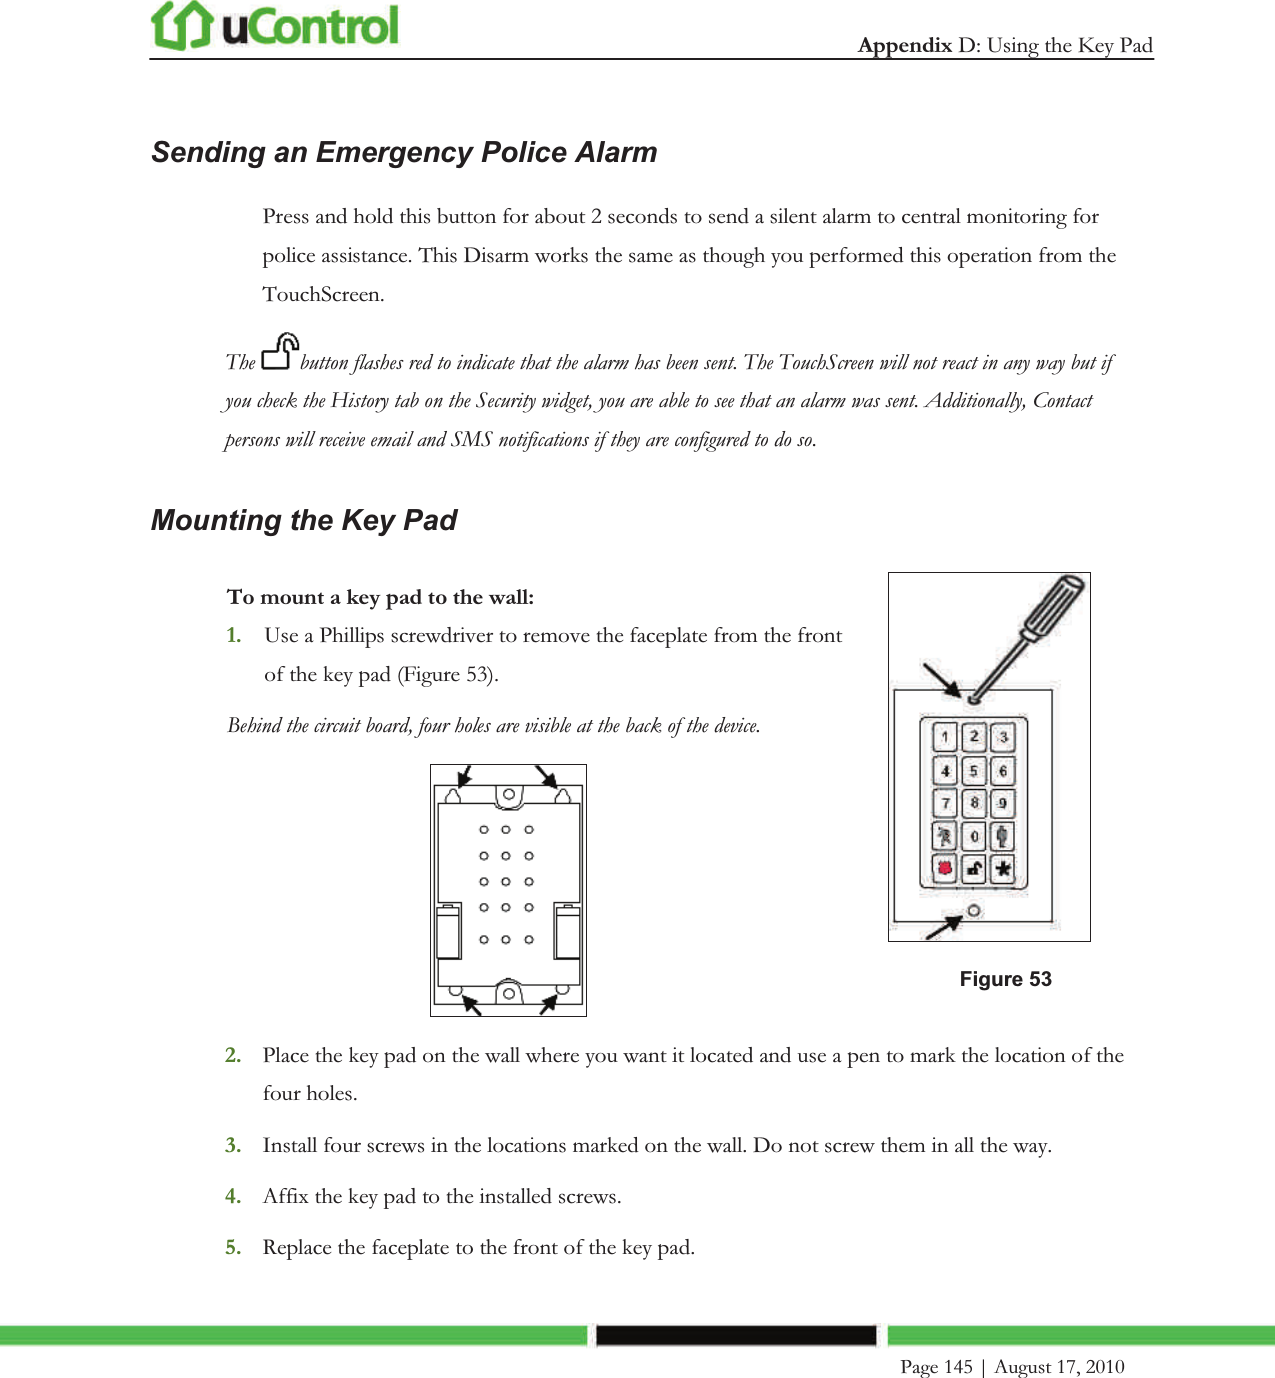  Appendix D: Using the Key Pad     Page 145 | August 17, 2010   Sending an Emergency Police Alarm Press and hold this button for about 2 seconds to send a silent alarm to central monitoring for police assistance. This Disarm works the same as though you performed this operation from the TouchScreen. The  button flashes red to indicate that the alarm has been sent. The TouchScreen will not react in any way but if you check the History tab on the Security widget, you are able to see that an alarm was sent. Additionally, Contact persons will receive email and SMS notifications if they are configured to do so. Mounting the Key Pad To mount a key pad to the wall: 1. Use a Phillips screwdriver to remove the faceplate from the front of the key pad (Figure 53). Behind the circuit board, four holes are visible at the back of the device.   Figure 53 2. Place the key pad on the wall where you want it located and use a pen to mark the location of the four holes. 3. Install four screws in the locations marked on the wall. Do not screw them in all the way. 4. Affix the key pad to the installed screws. 5. Replace the faceplate to the front of the key pad. 